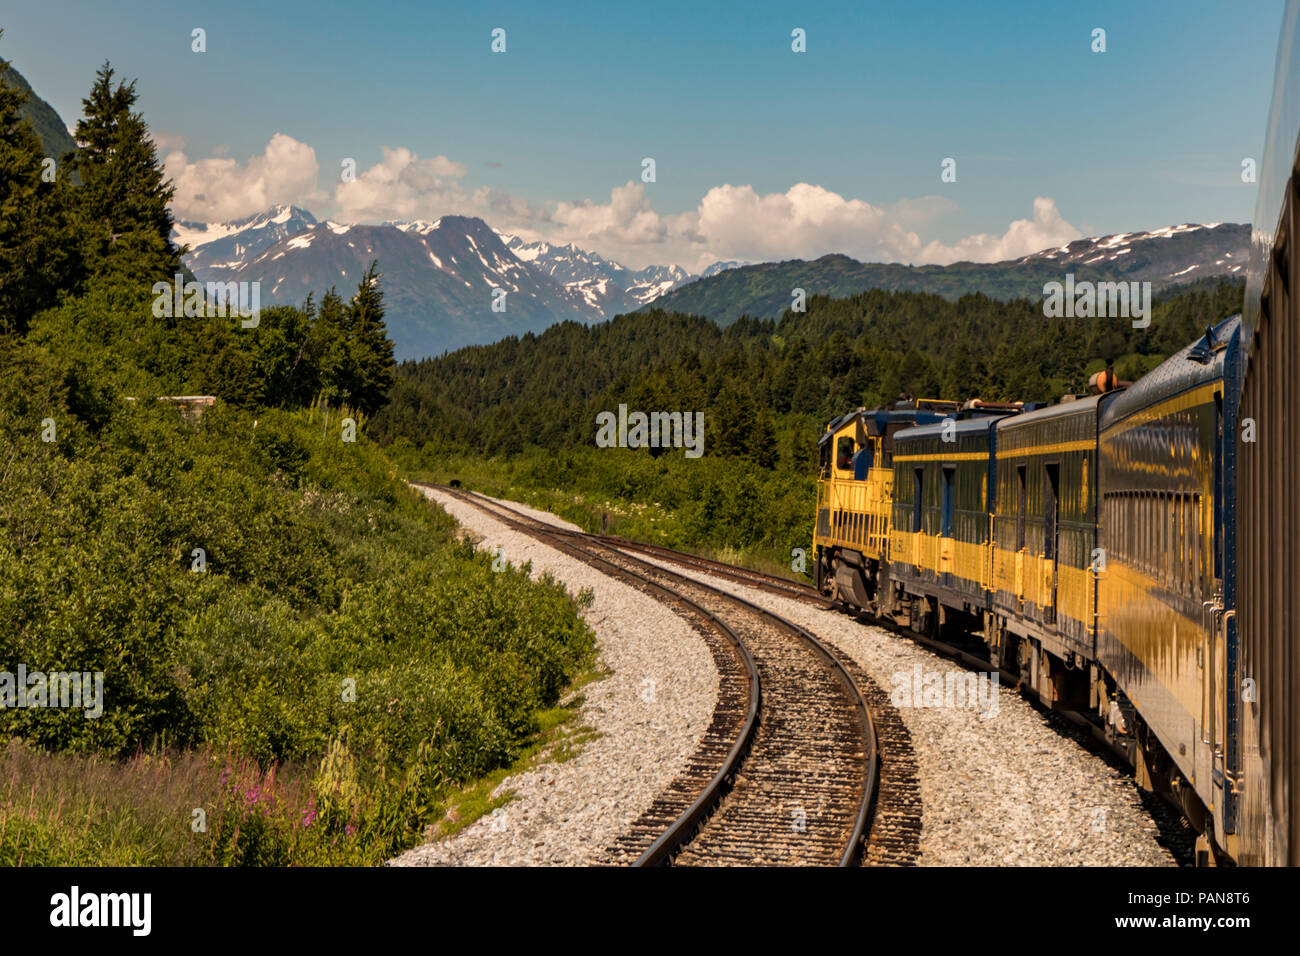 A bear crosses the tracks ahead of a train in Alaska, USA in summertime. Stock Photo